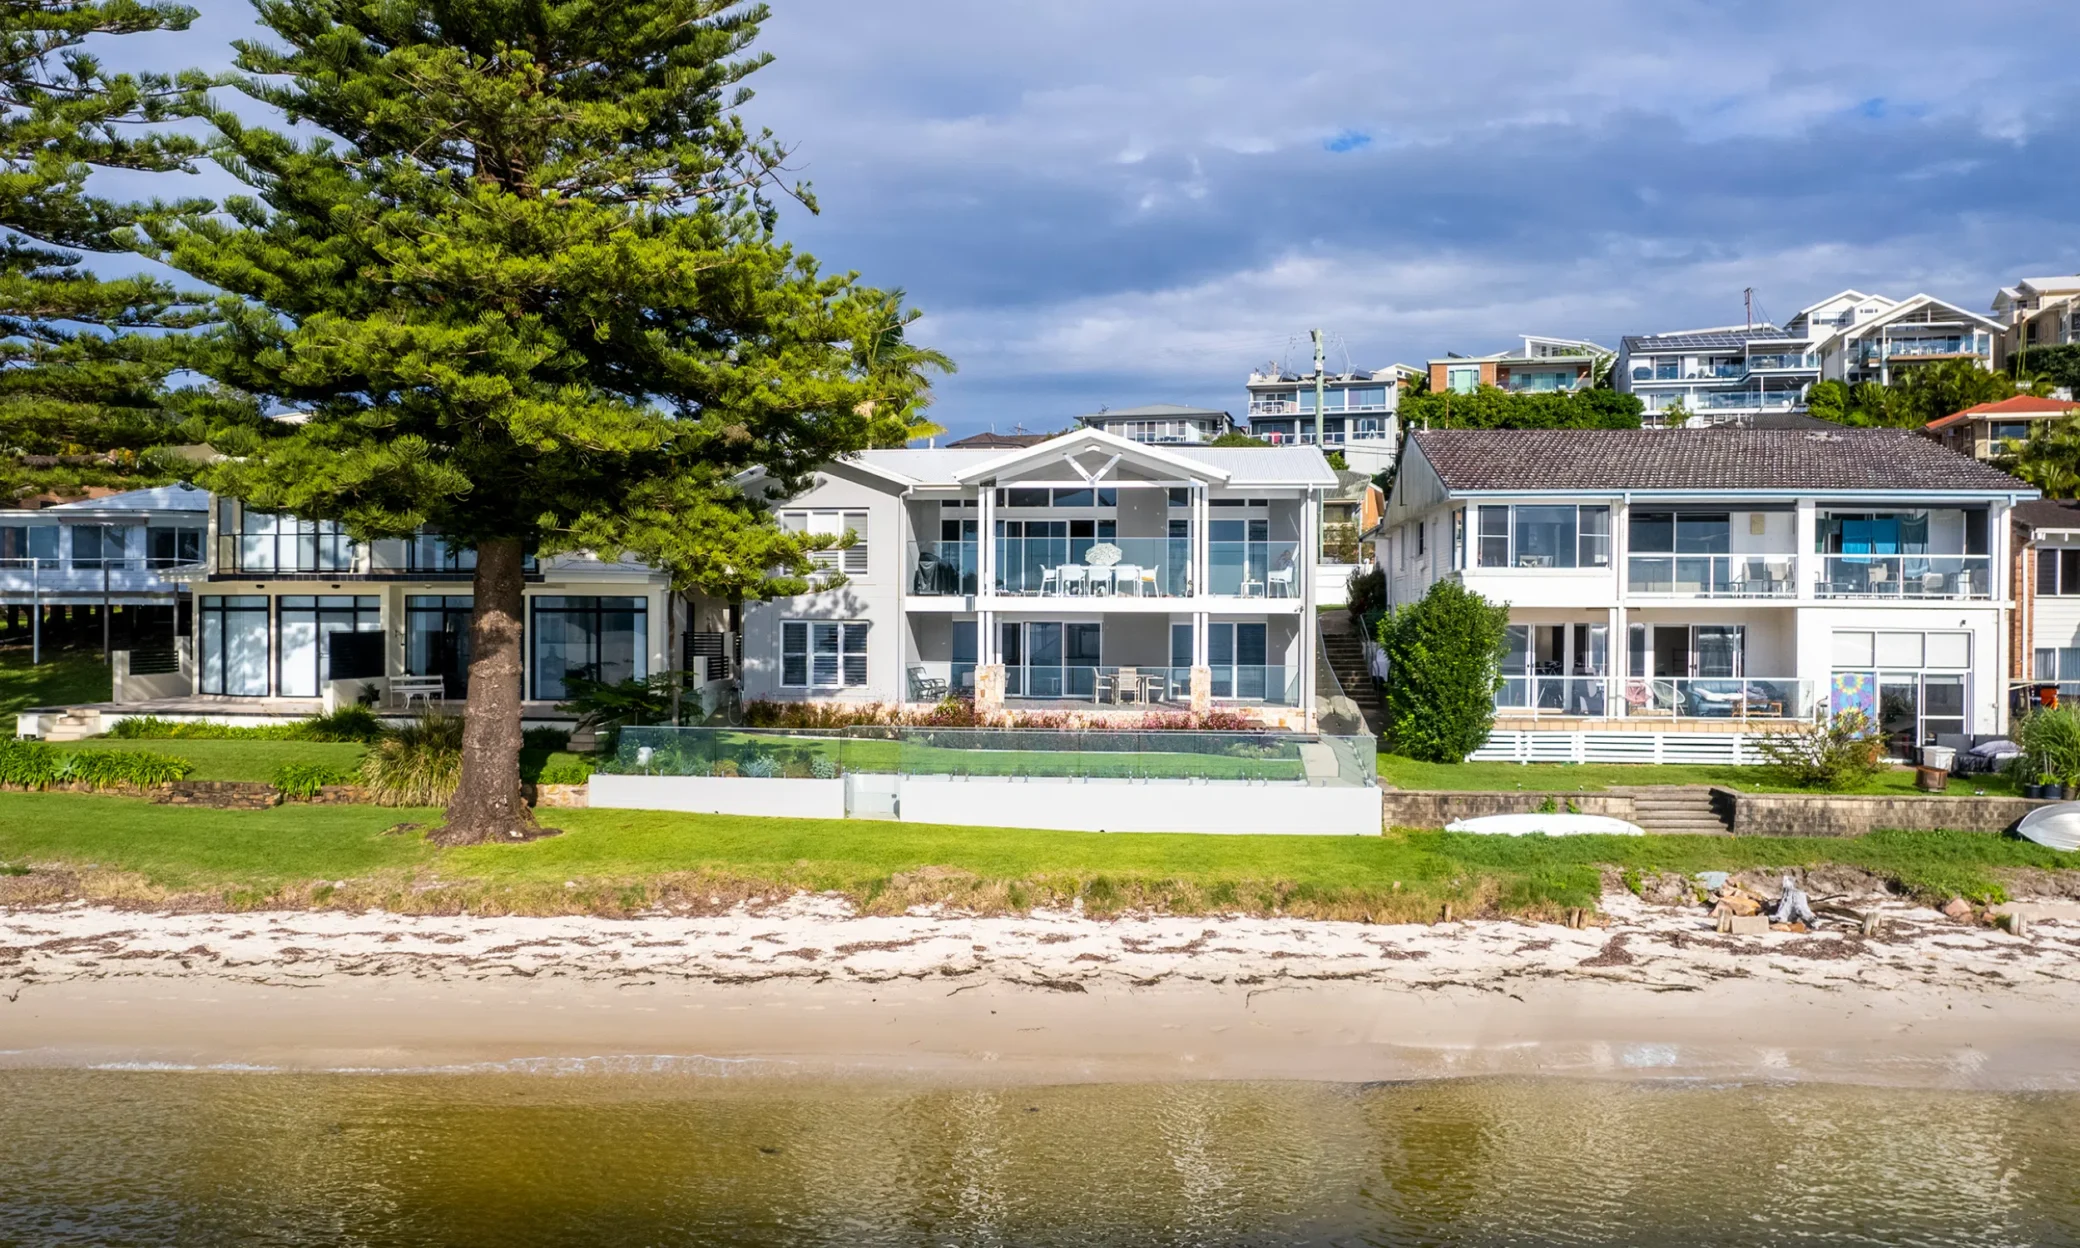 Luxury beachfront houses in Nelson Bay with large glass balconies overlooking a sandy shore, flanked by a lush green tree on the left. The houses feature contemporary architecture and are situated under a partly